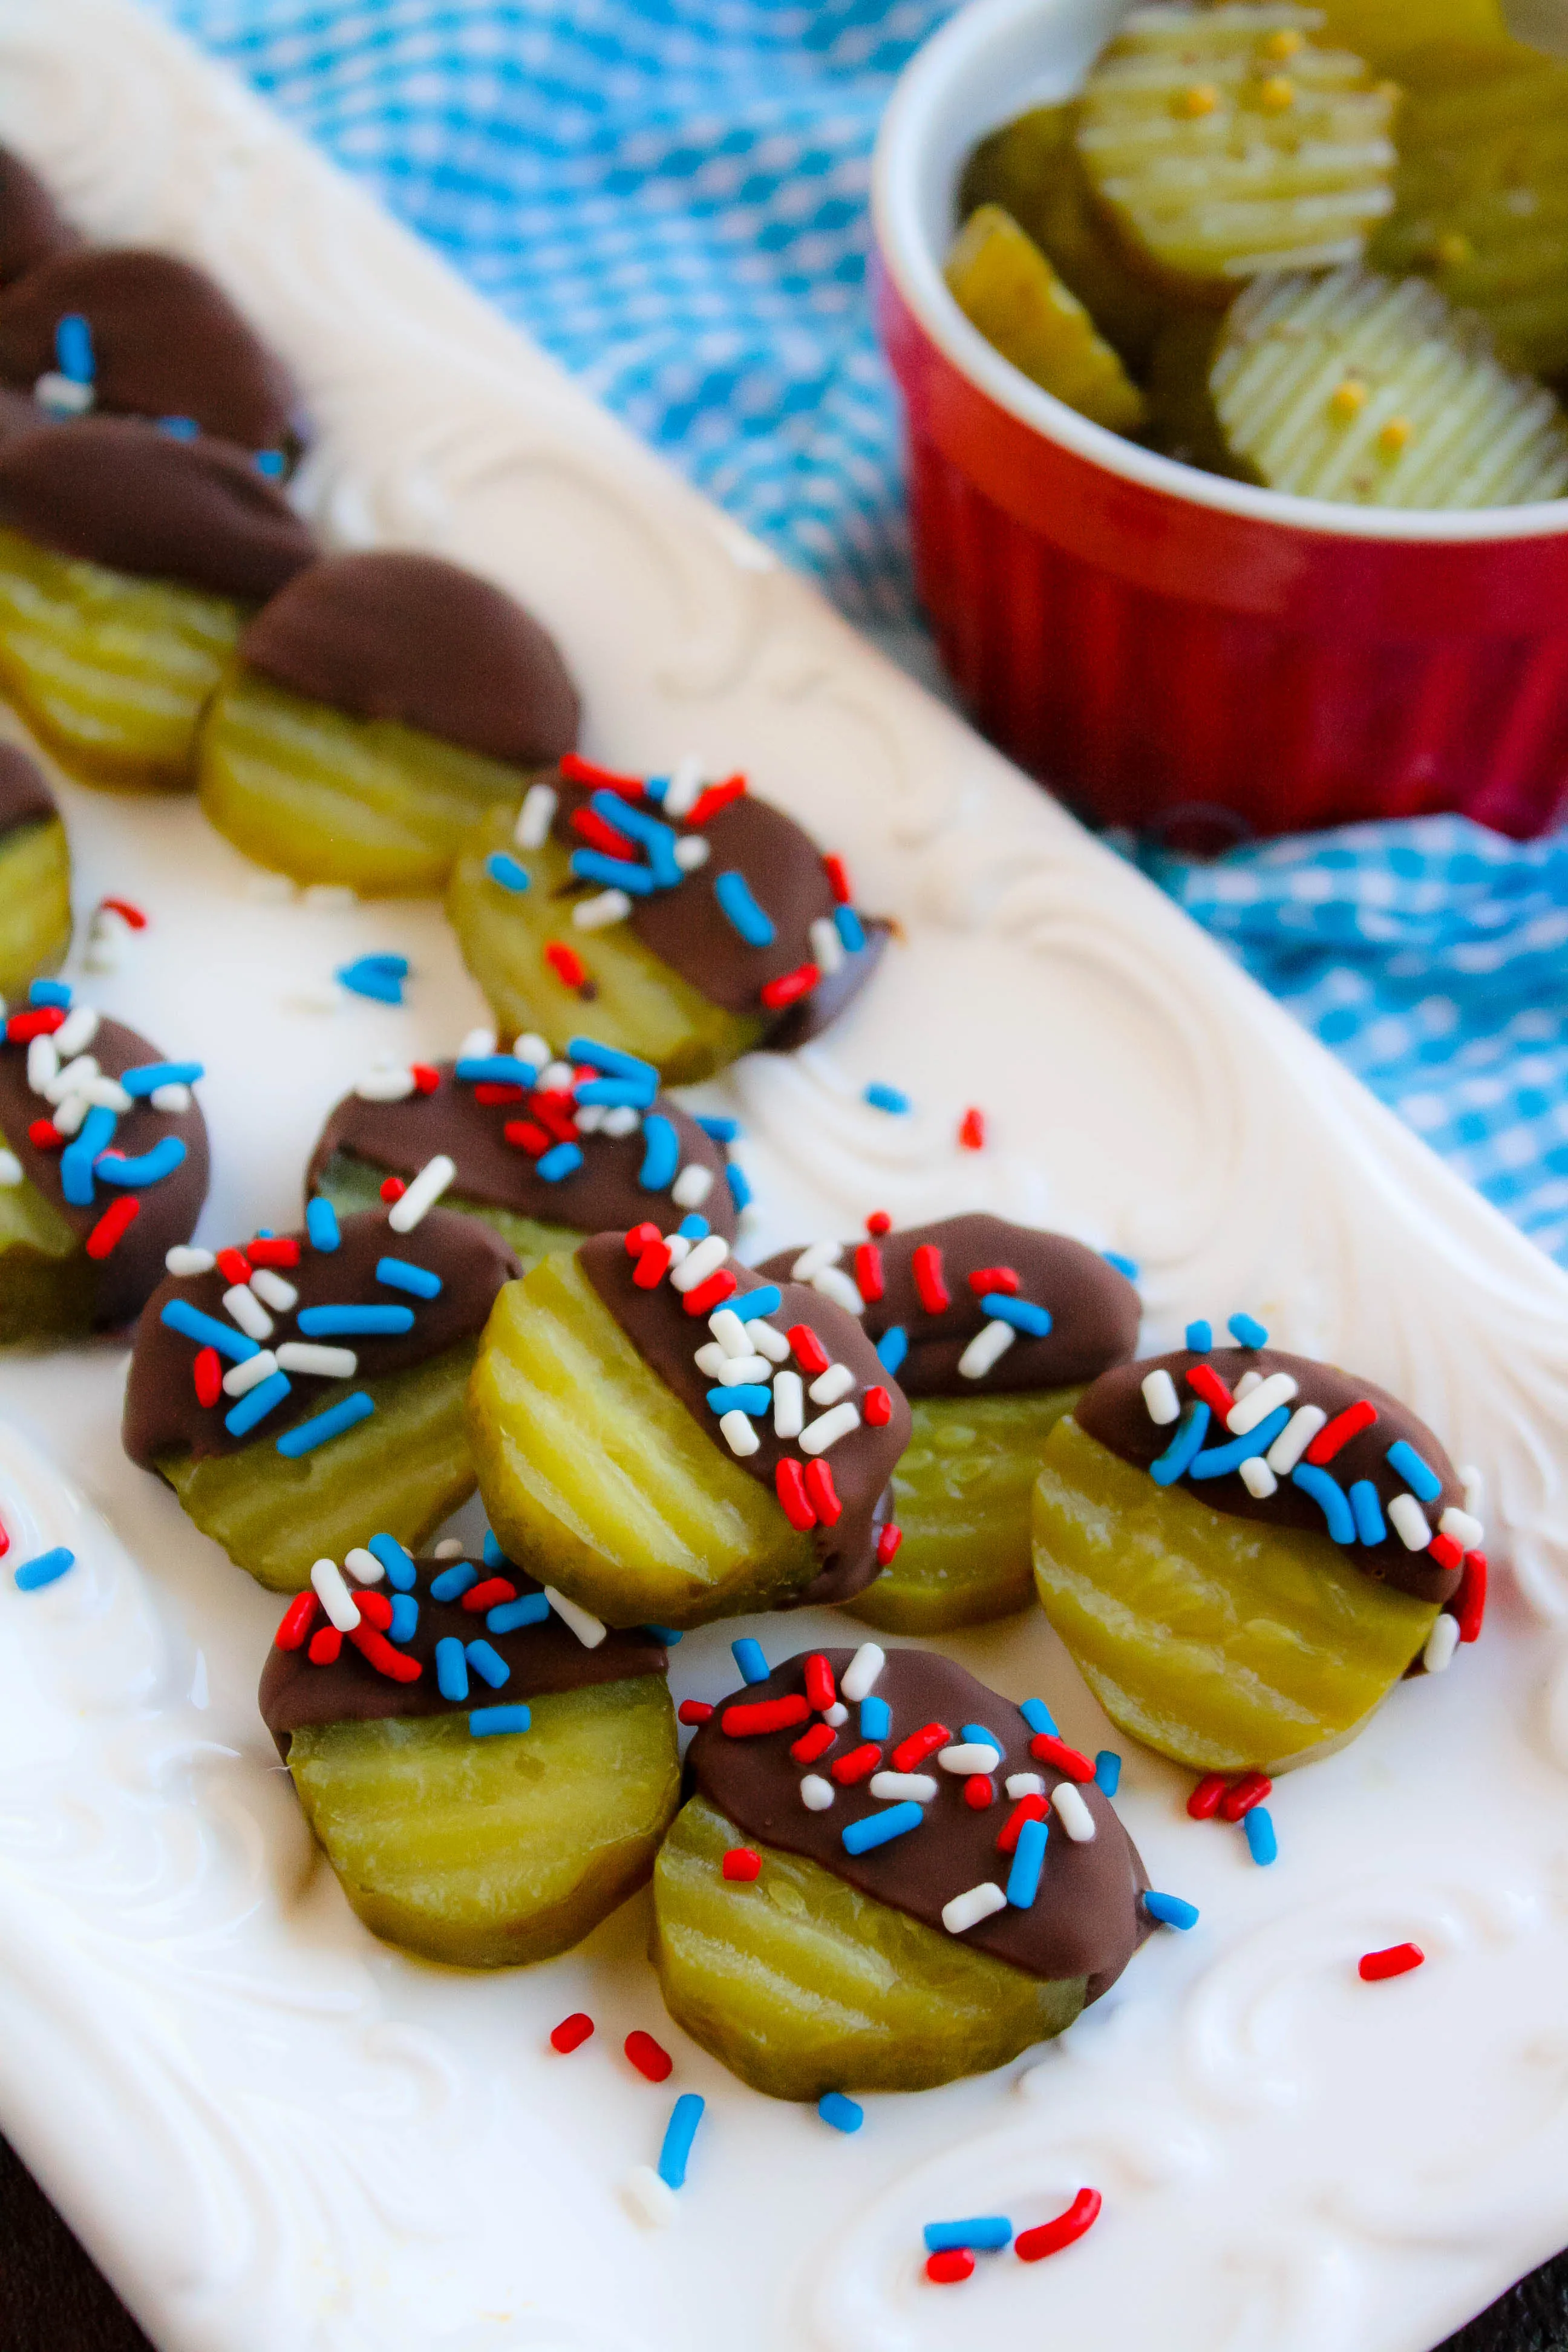 Chocolate Covered Pickles with Homemade Magic Shell make a fun treat! You'll love these Chocolate Covered Pickles with Homemade Magic Shell for a special treat.